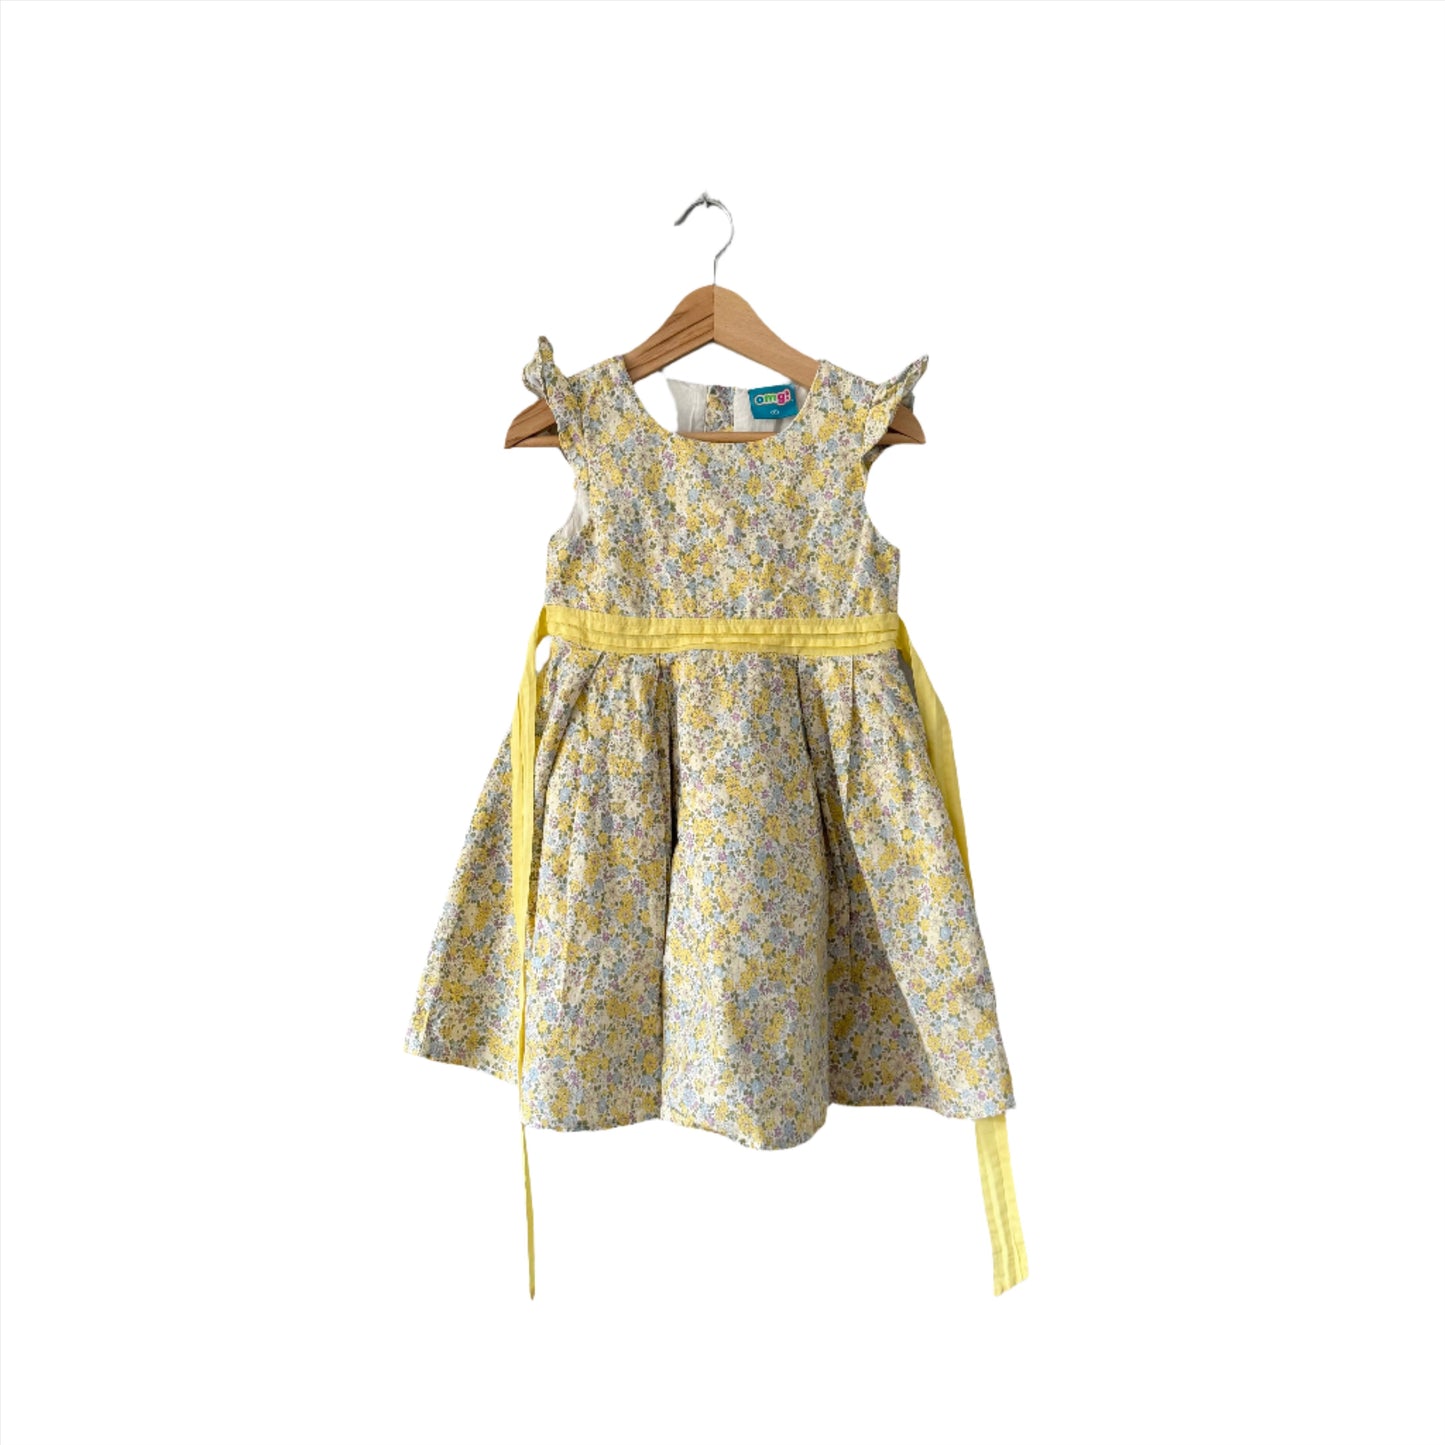 OMG! / Yellow floral dress / 3T